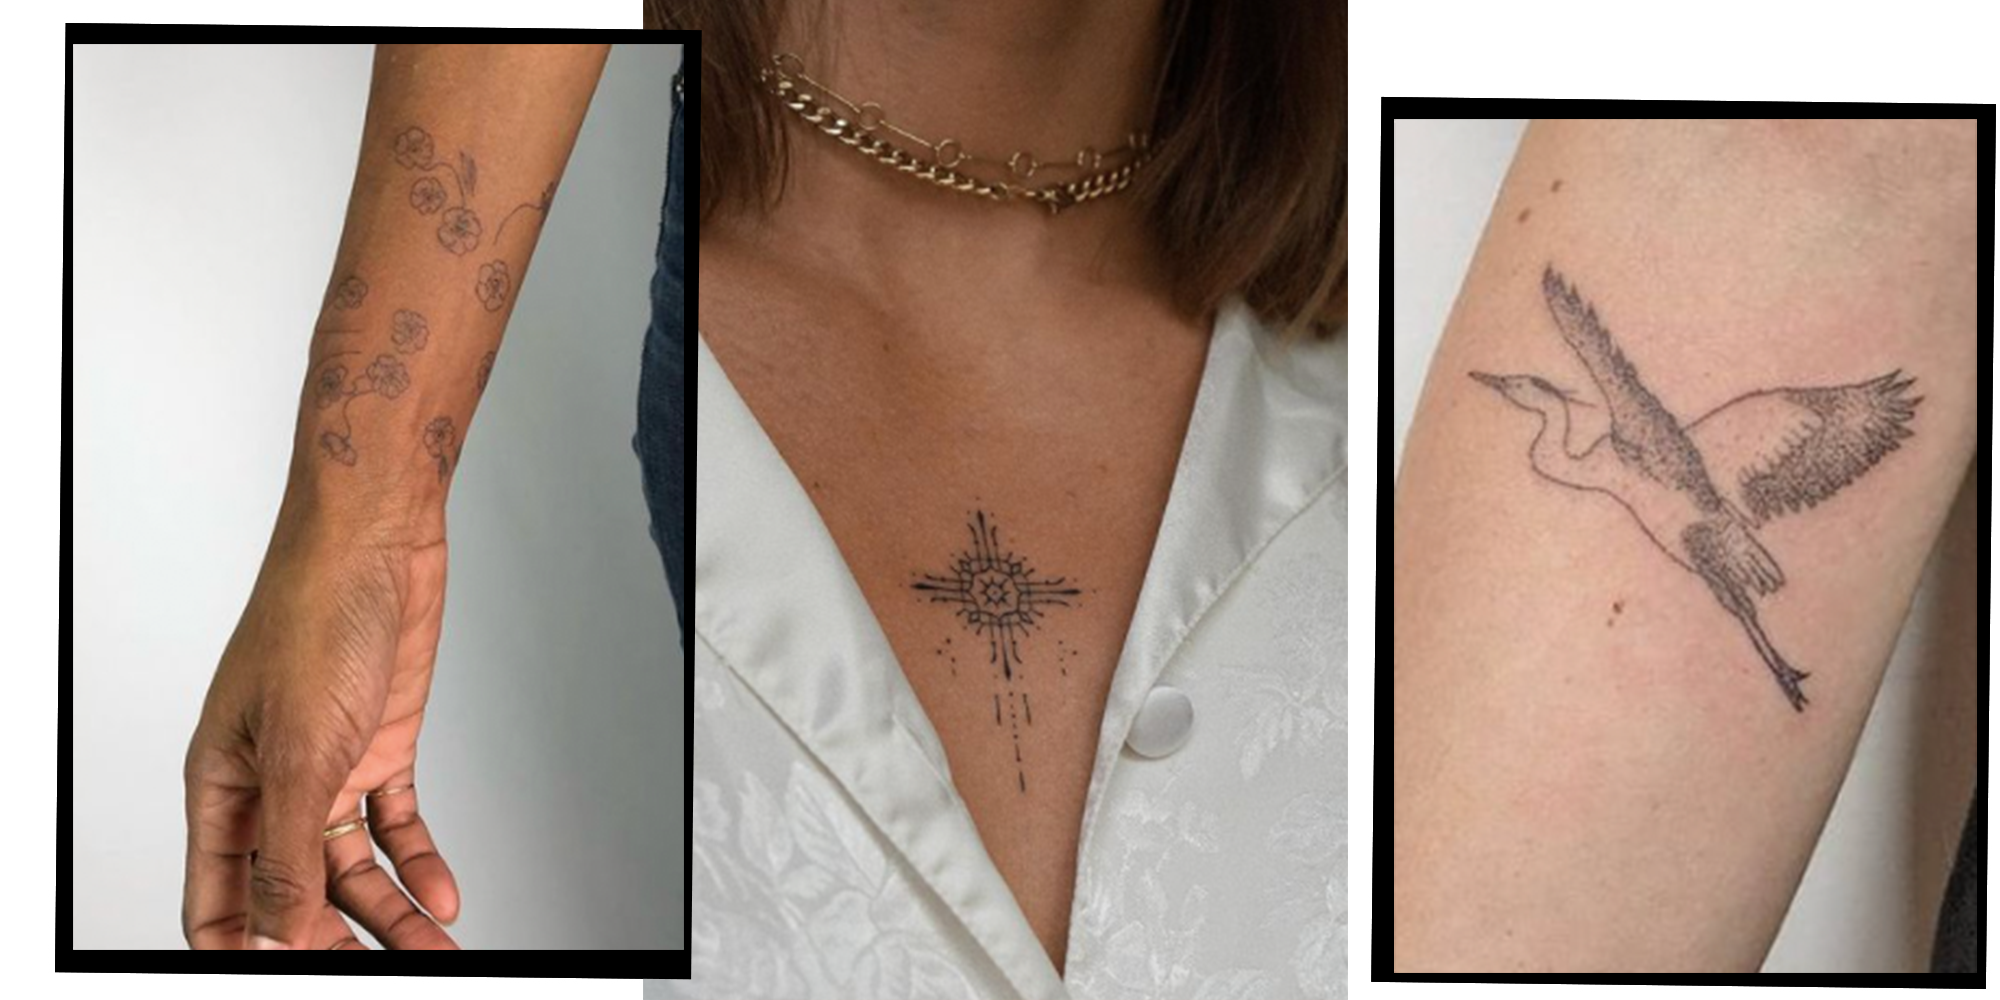 What Are Stick and Poke Tattoos? - Marine Agency